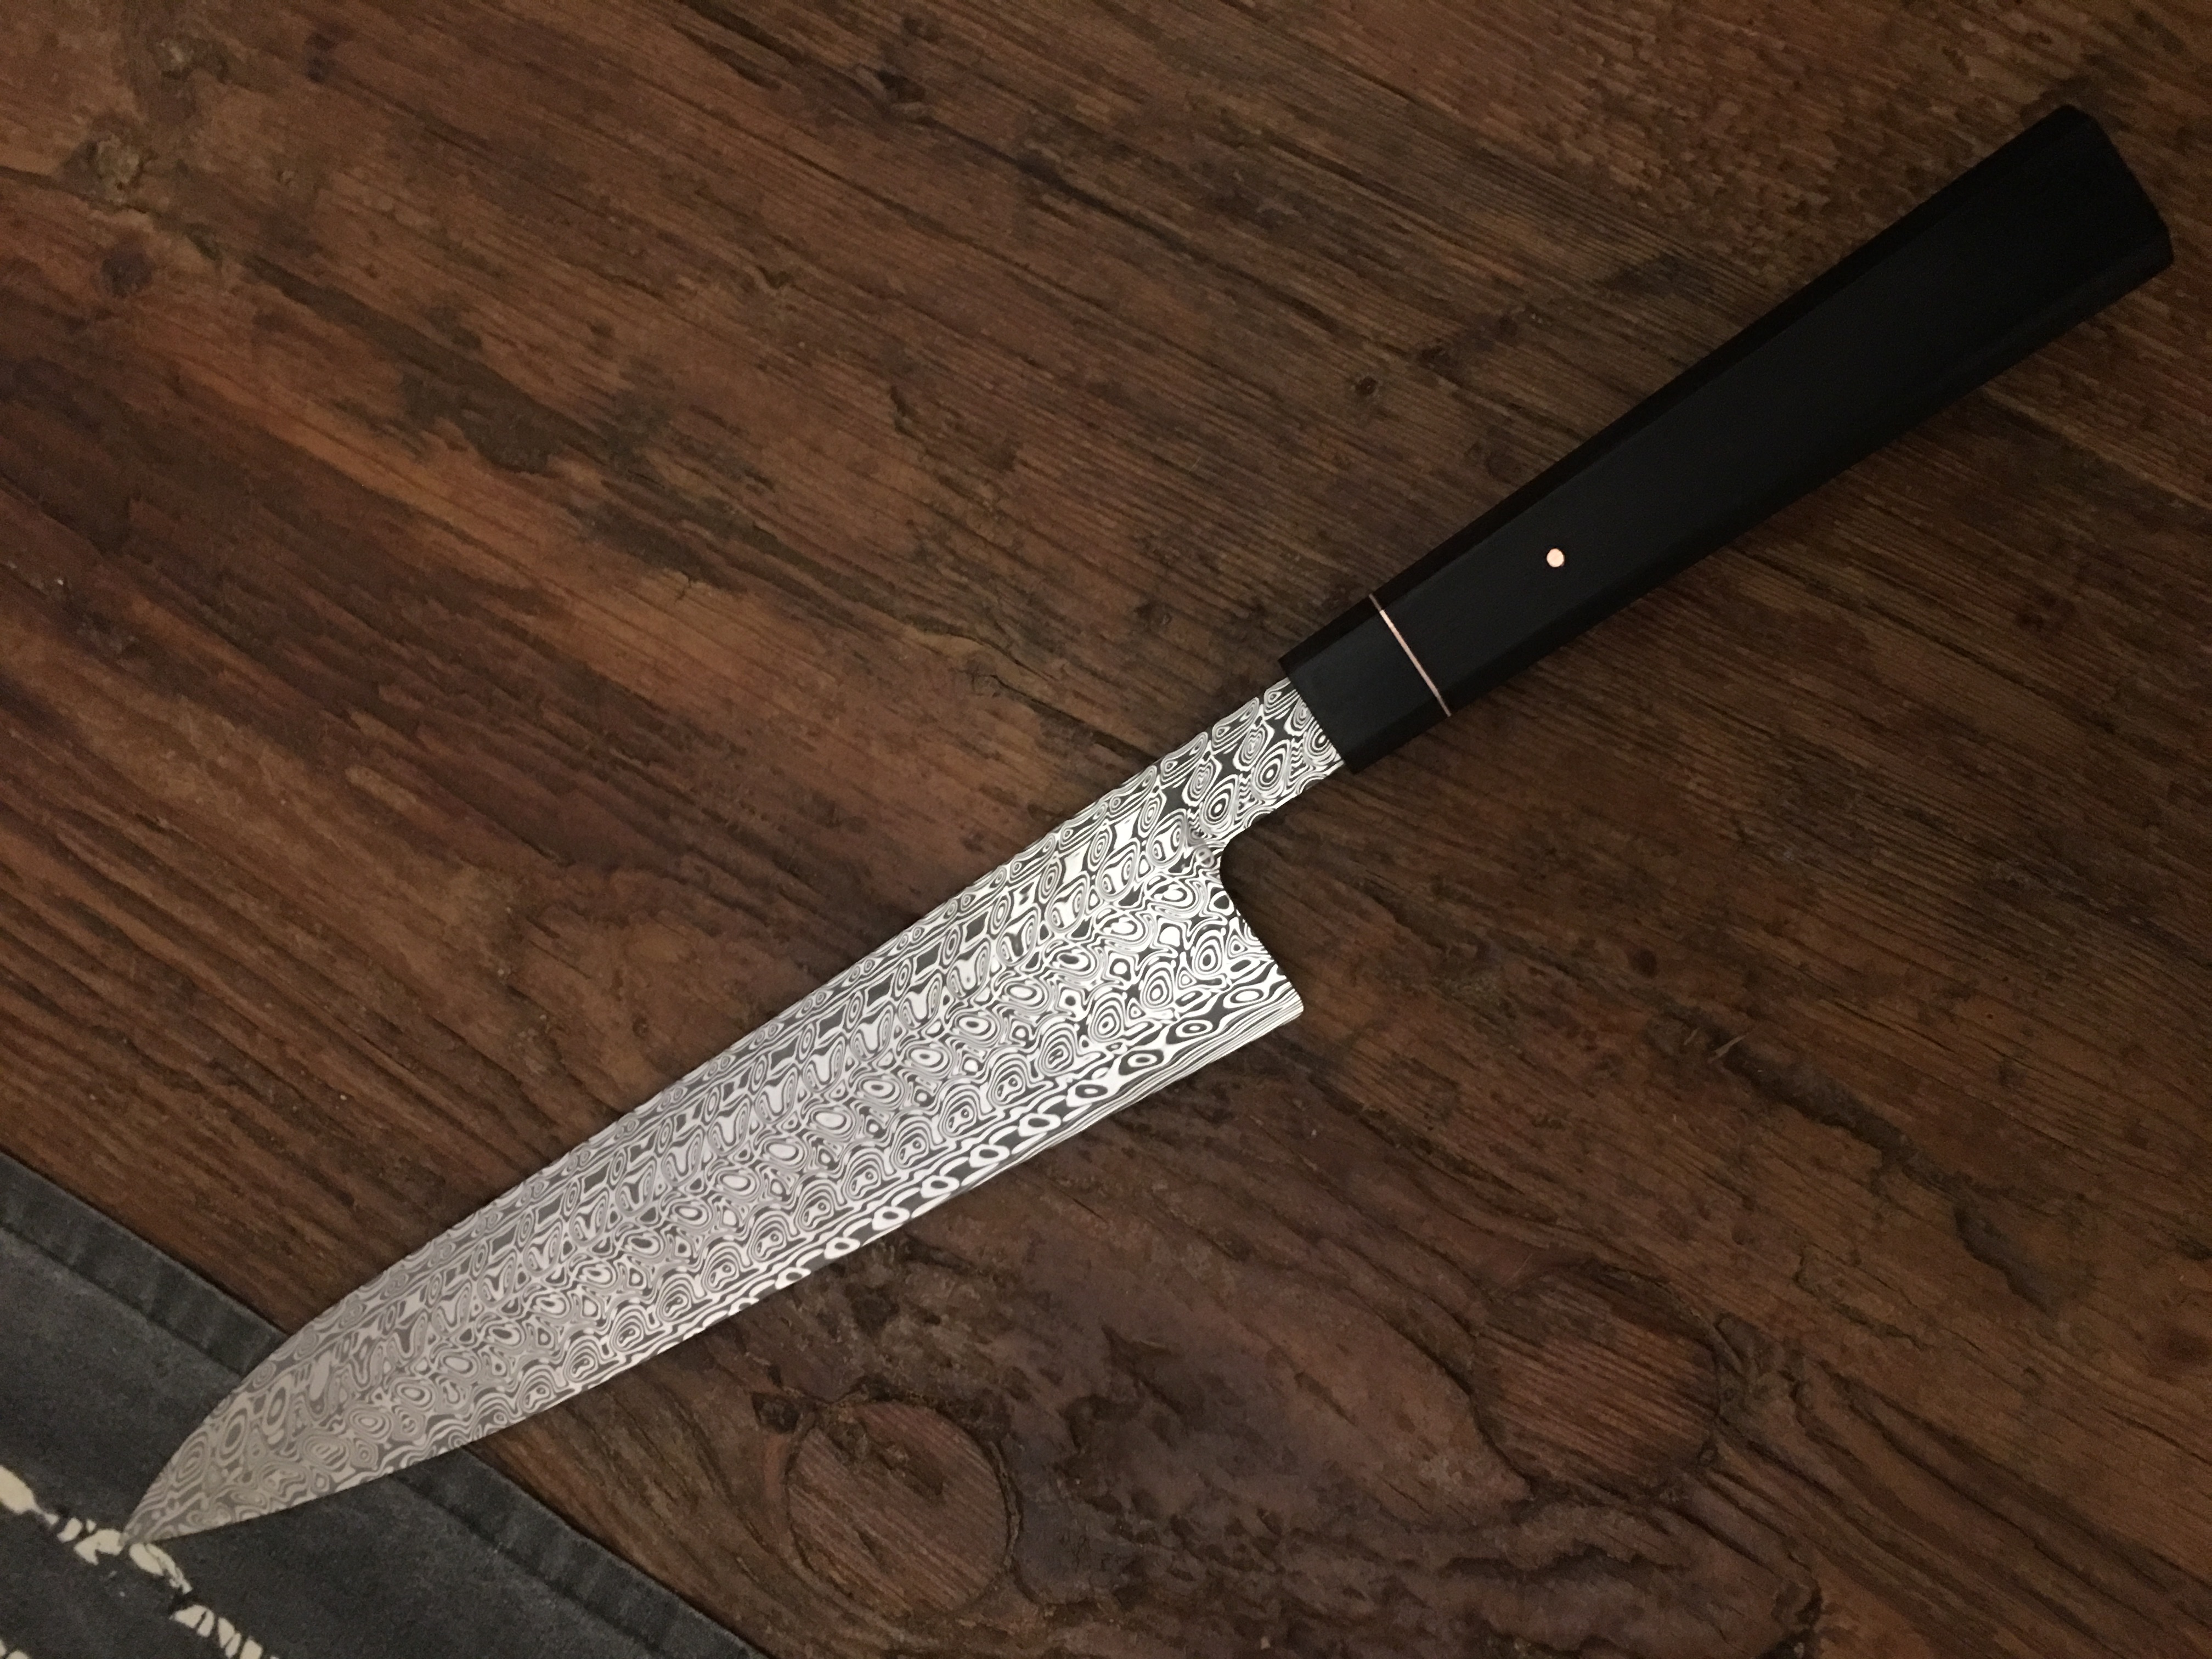 This was a commission that was changed so I had this for the DEKS show where it won best of show Kitchen knife!!! Agier pattern by Damasteel with African black ivory handle and copper.